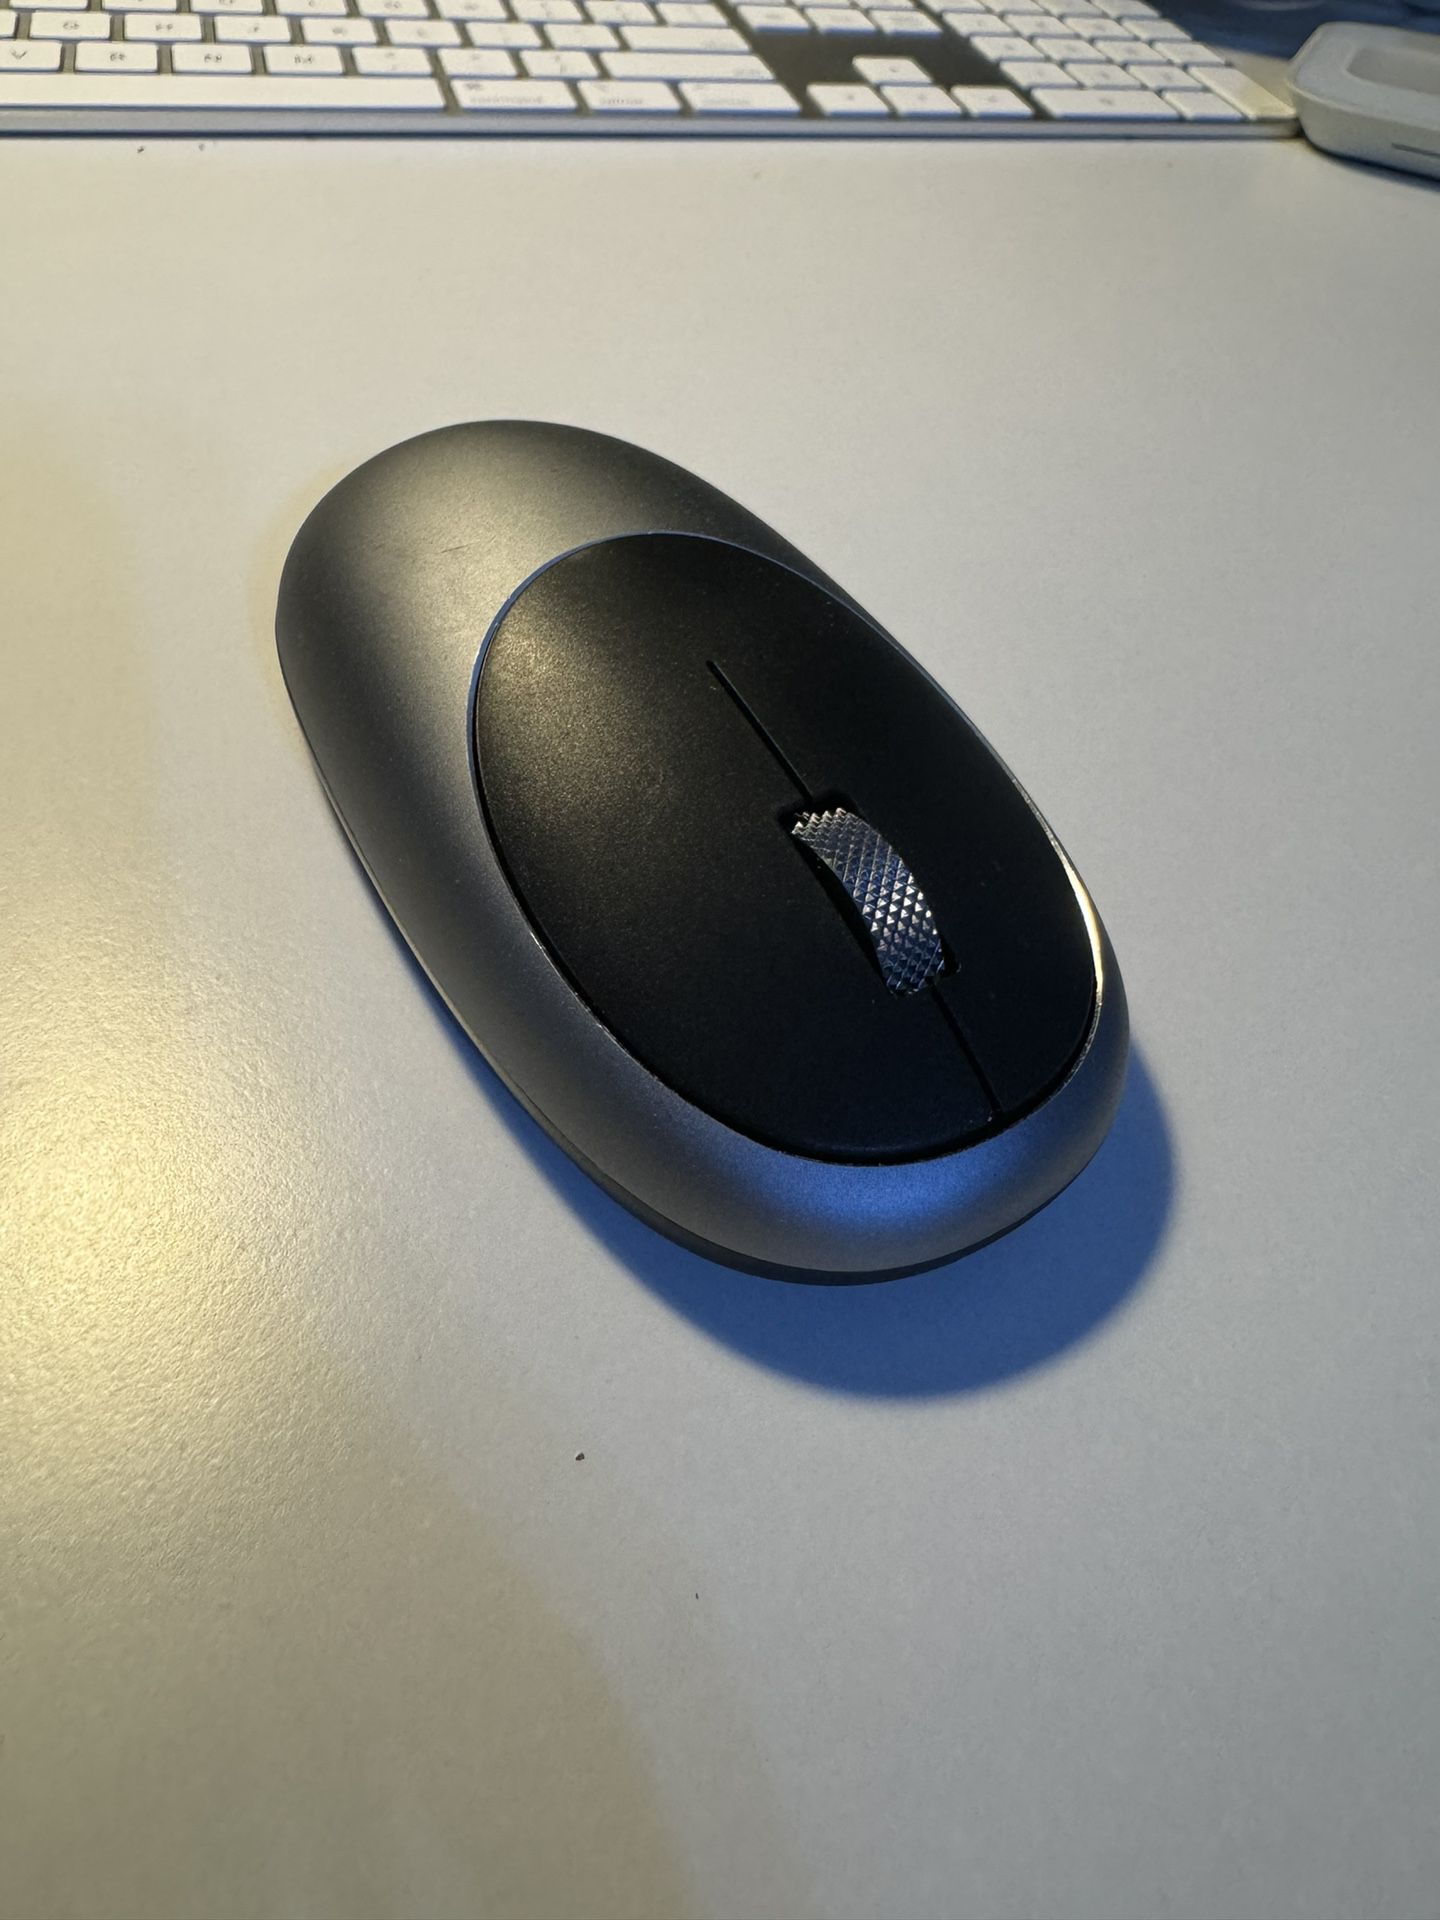 Satechi Wireless Bluetooth Mouse for MacBook Pro, Ipad, or Windows